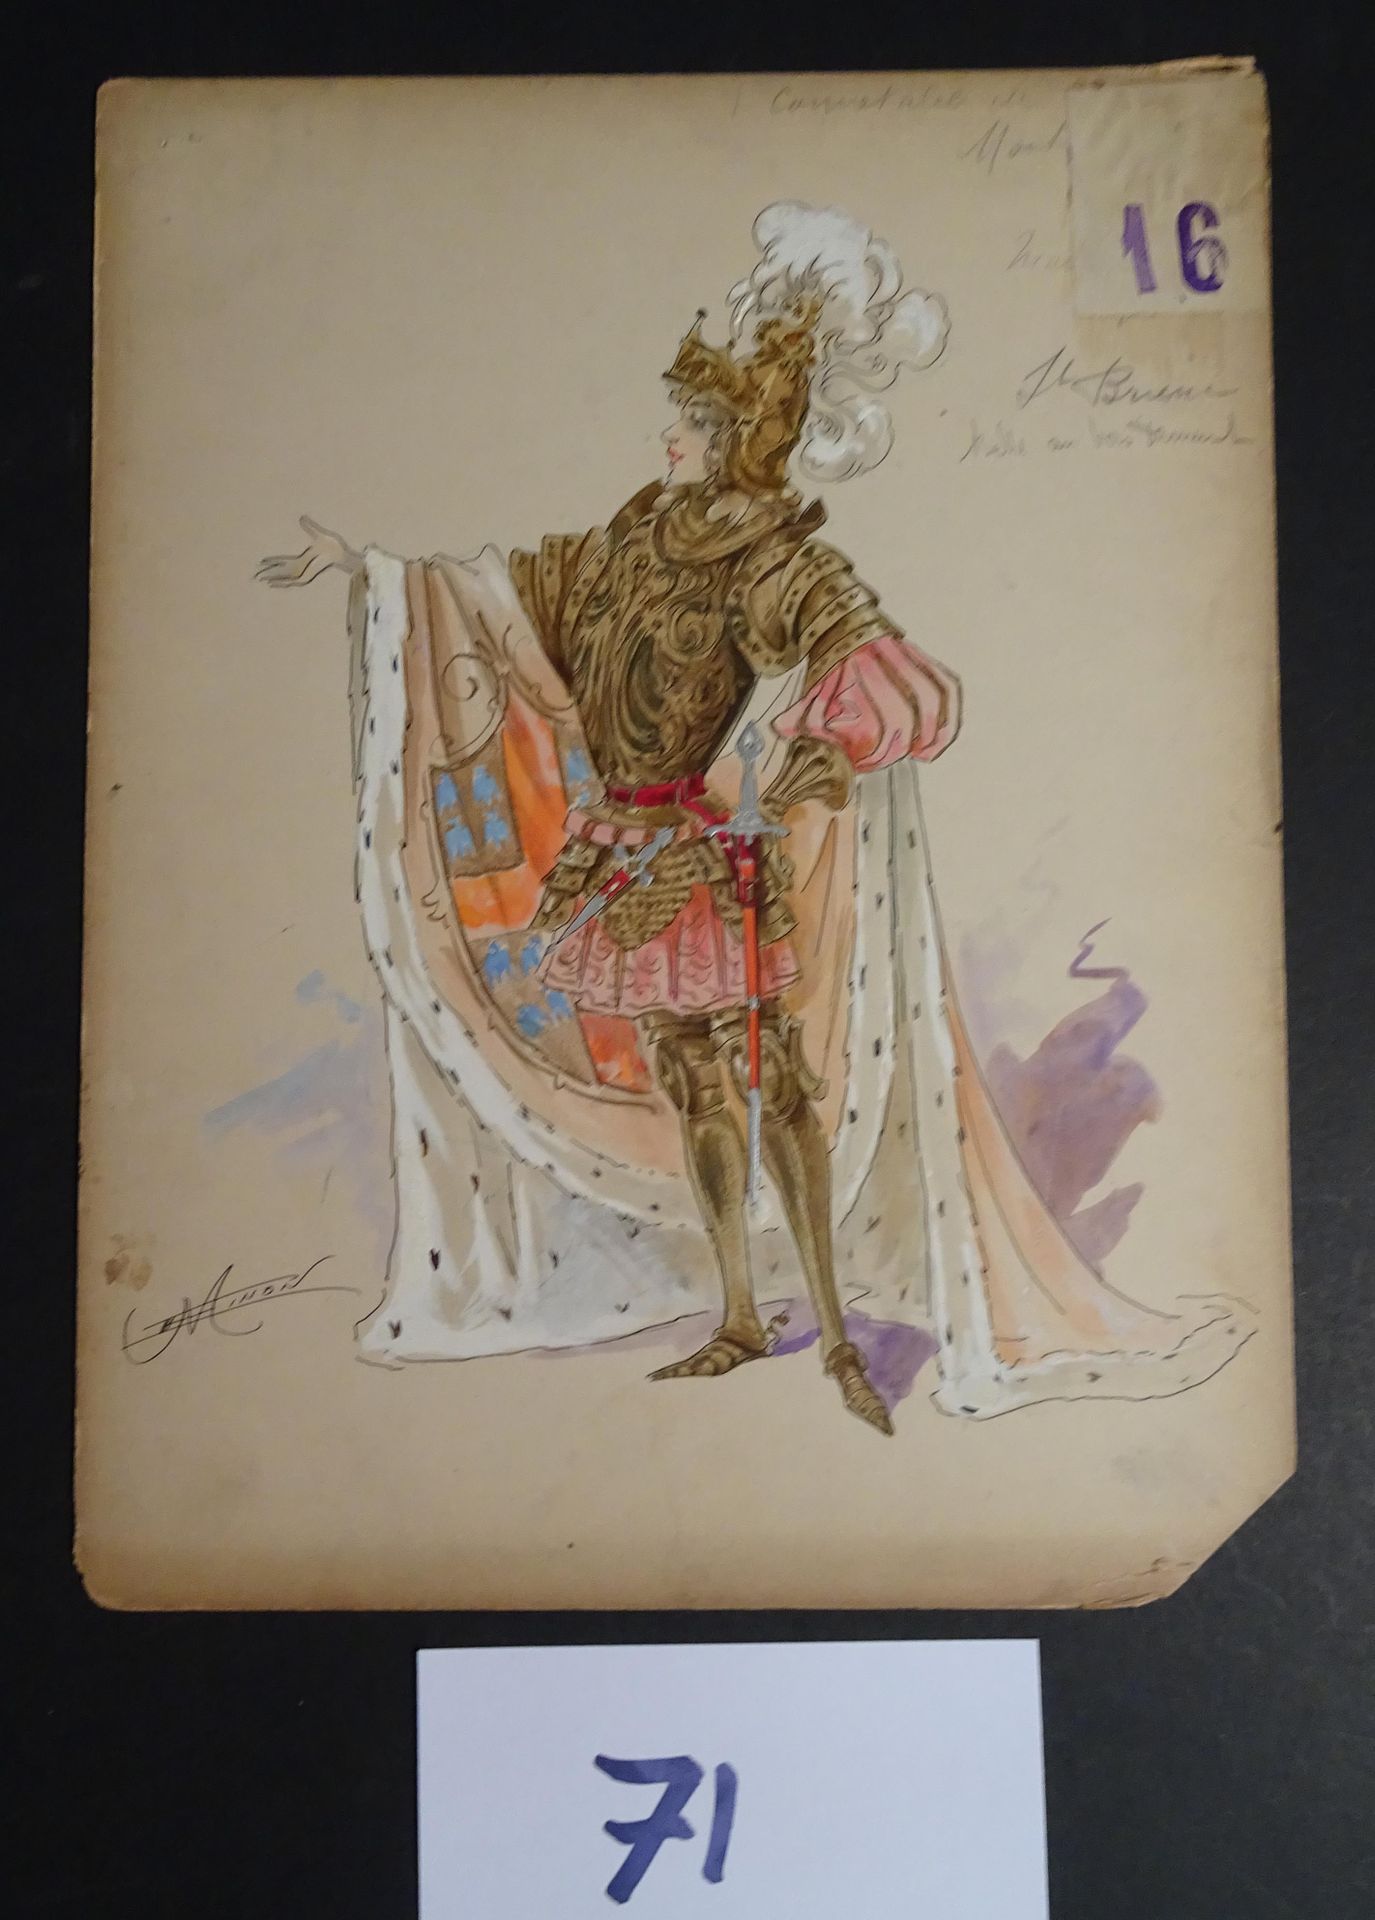 MINON MINON

"The knight" c.1880 for a review "Sleeping Beauty". Watercolor goua&hellip;